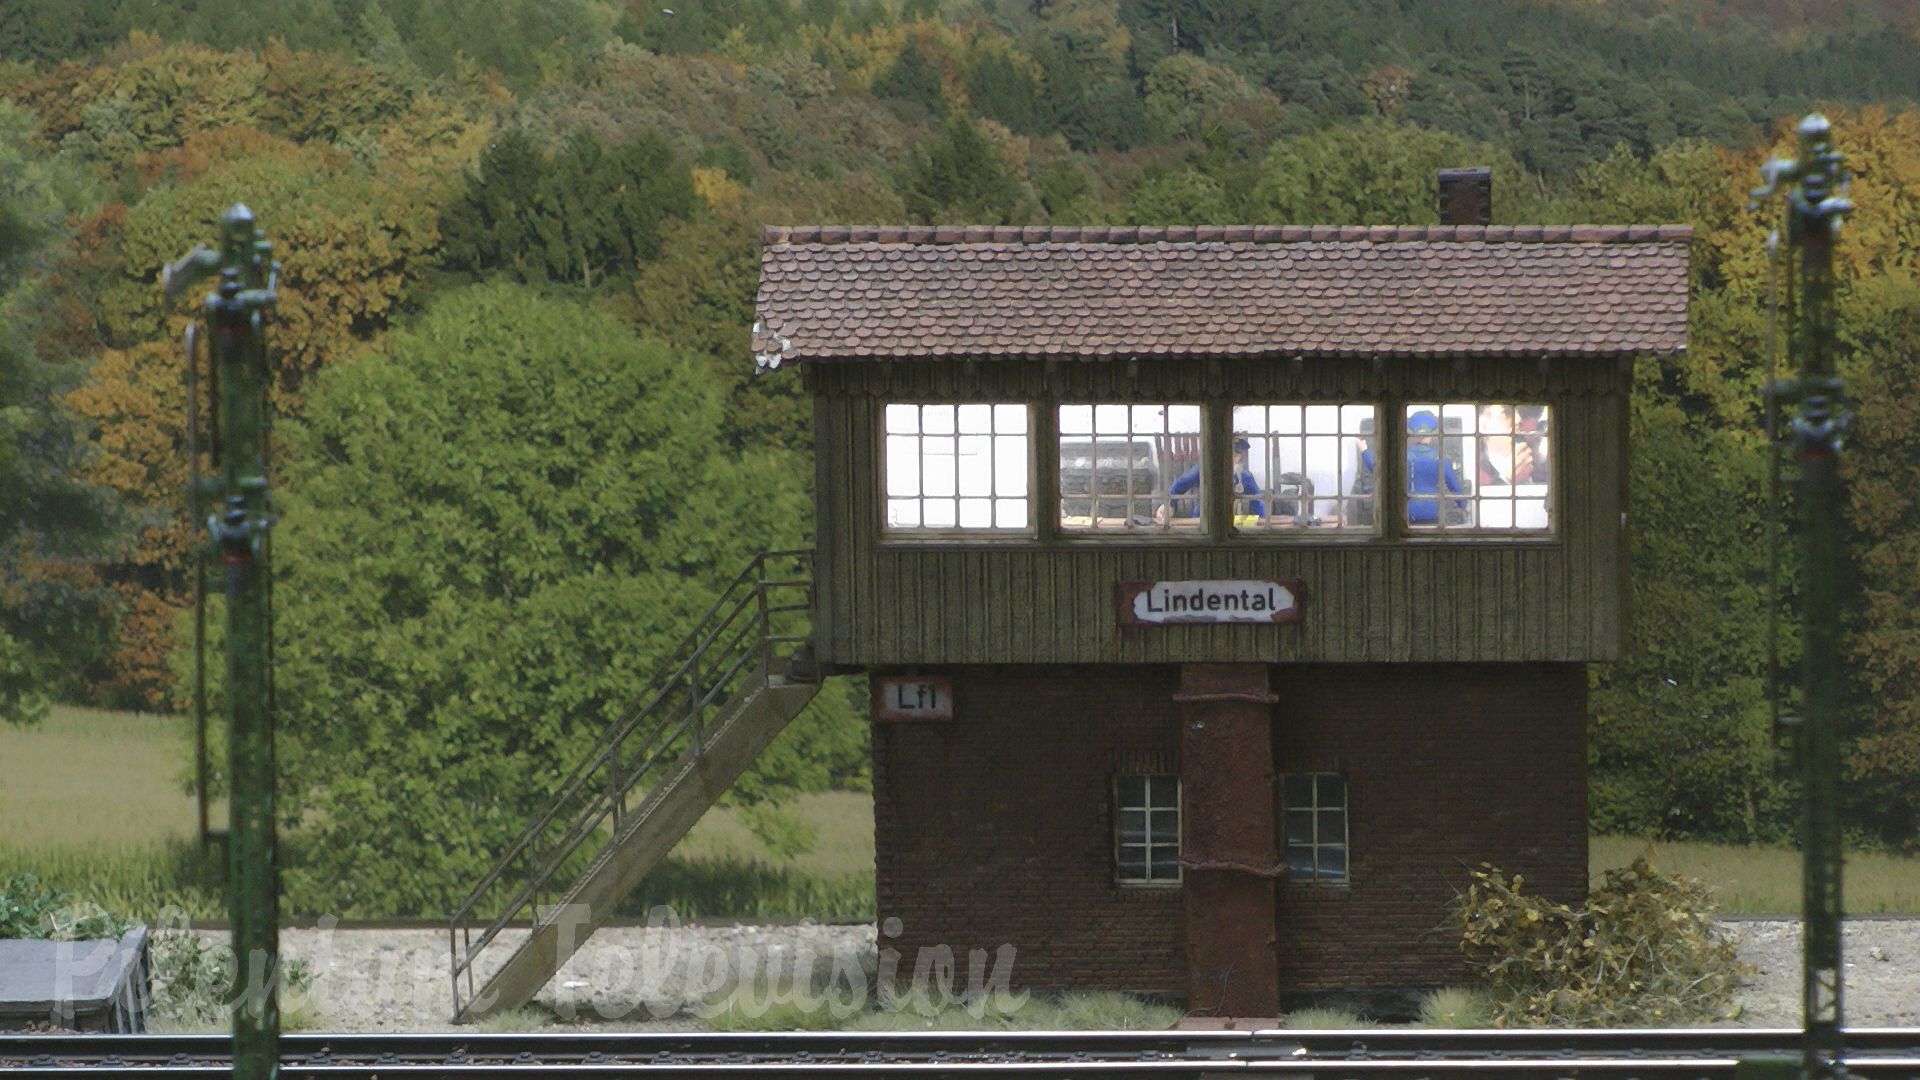 One of Germany’s most extraordinary HO Scale Model Railroad Layouts - 8k Video Ultra HD